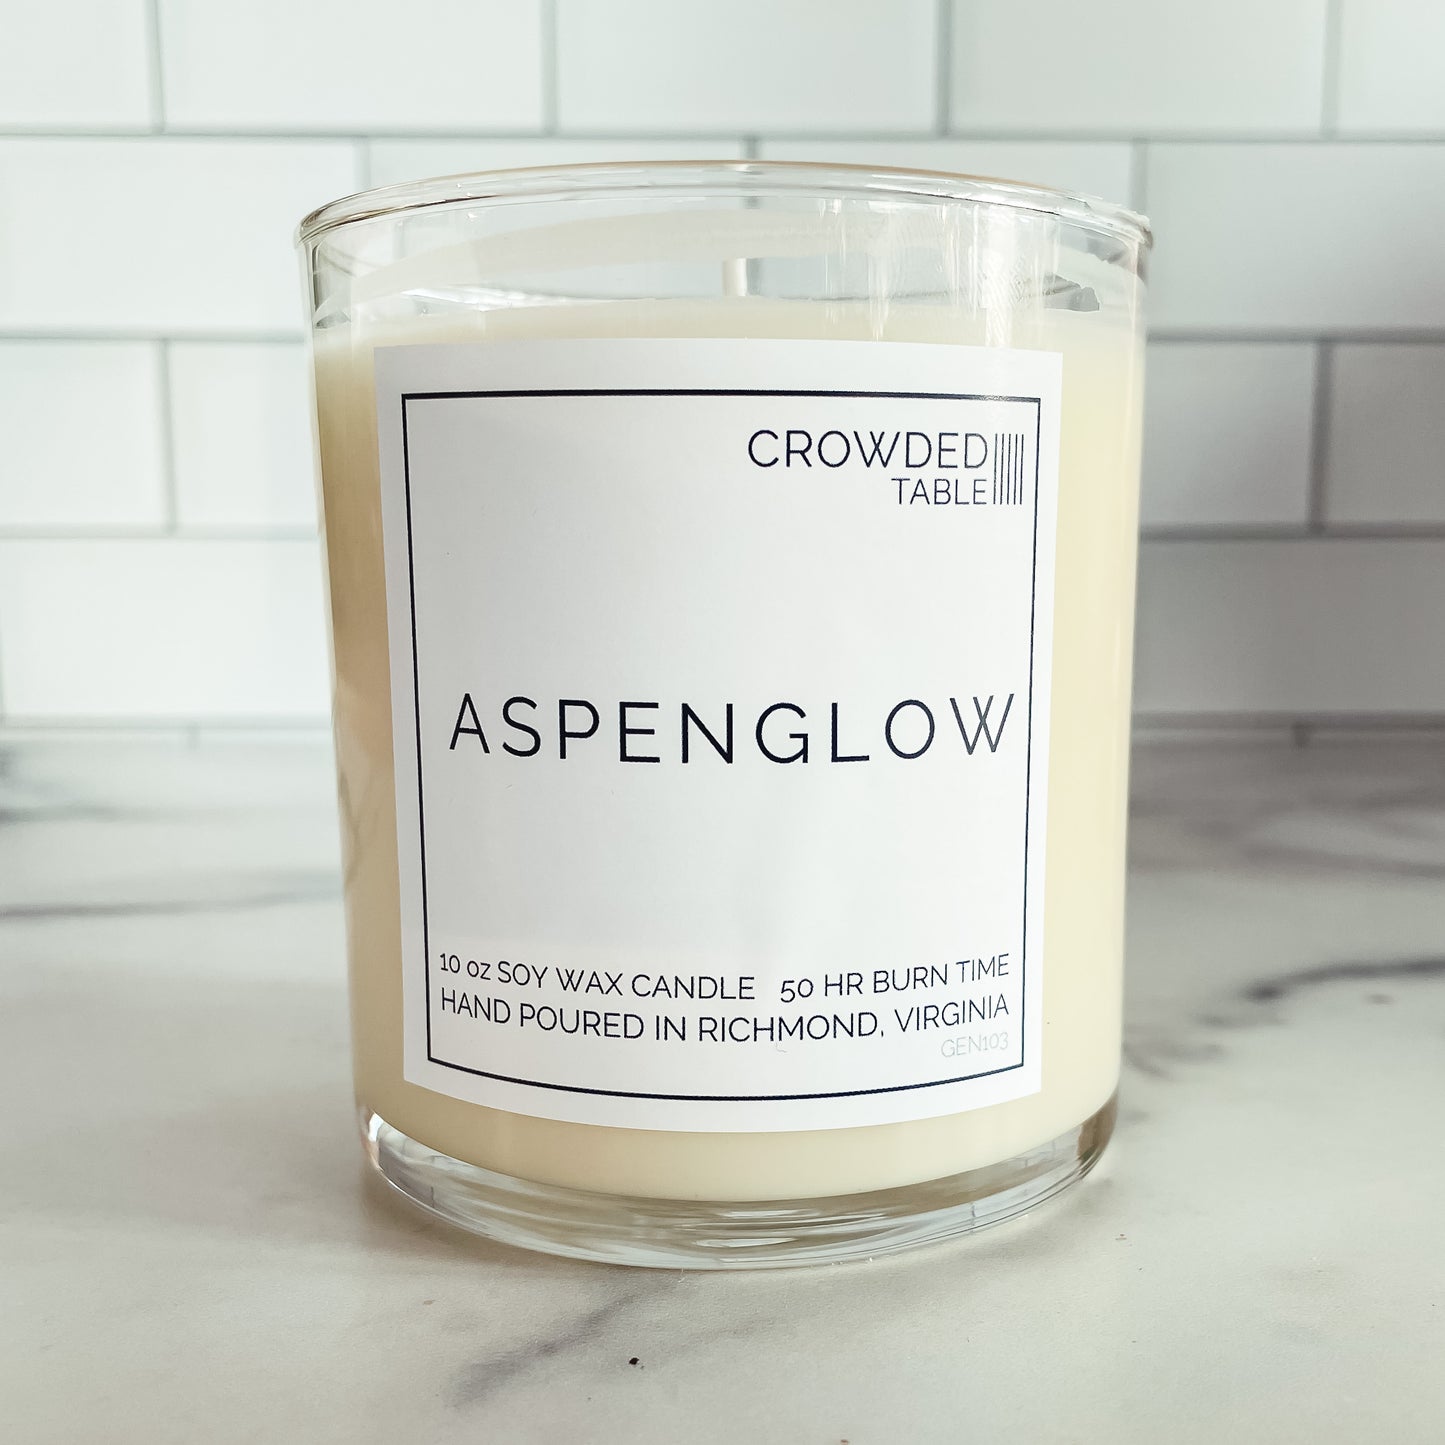 Aspenglow 10 oz. Pure Soy Wax Candle